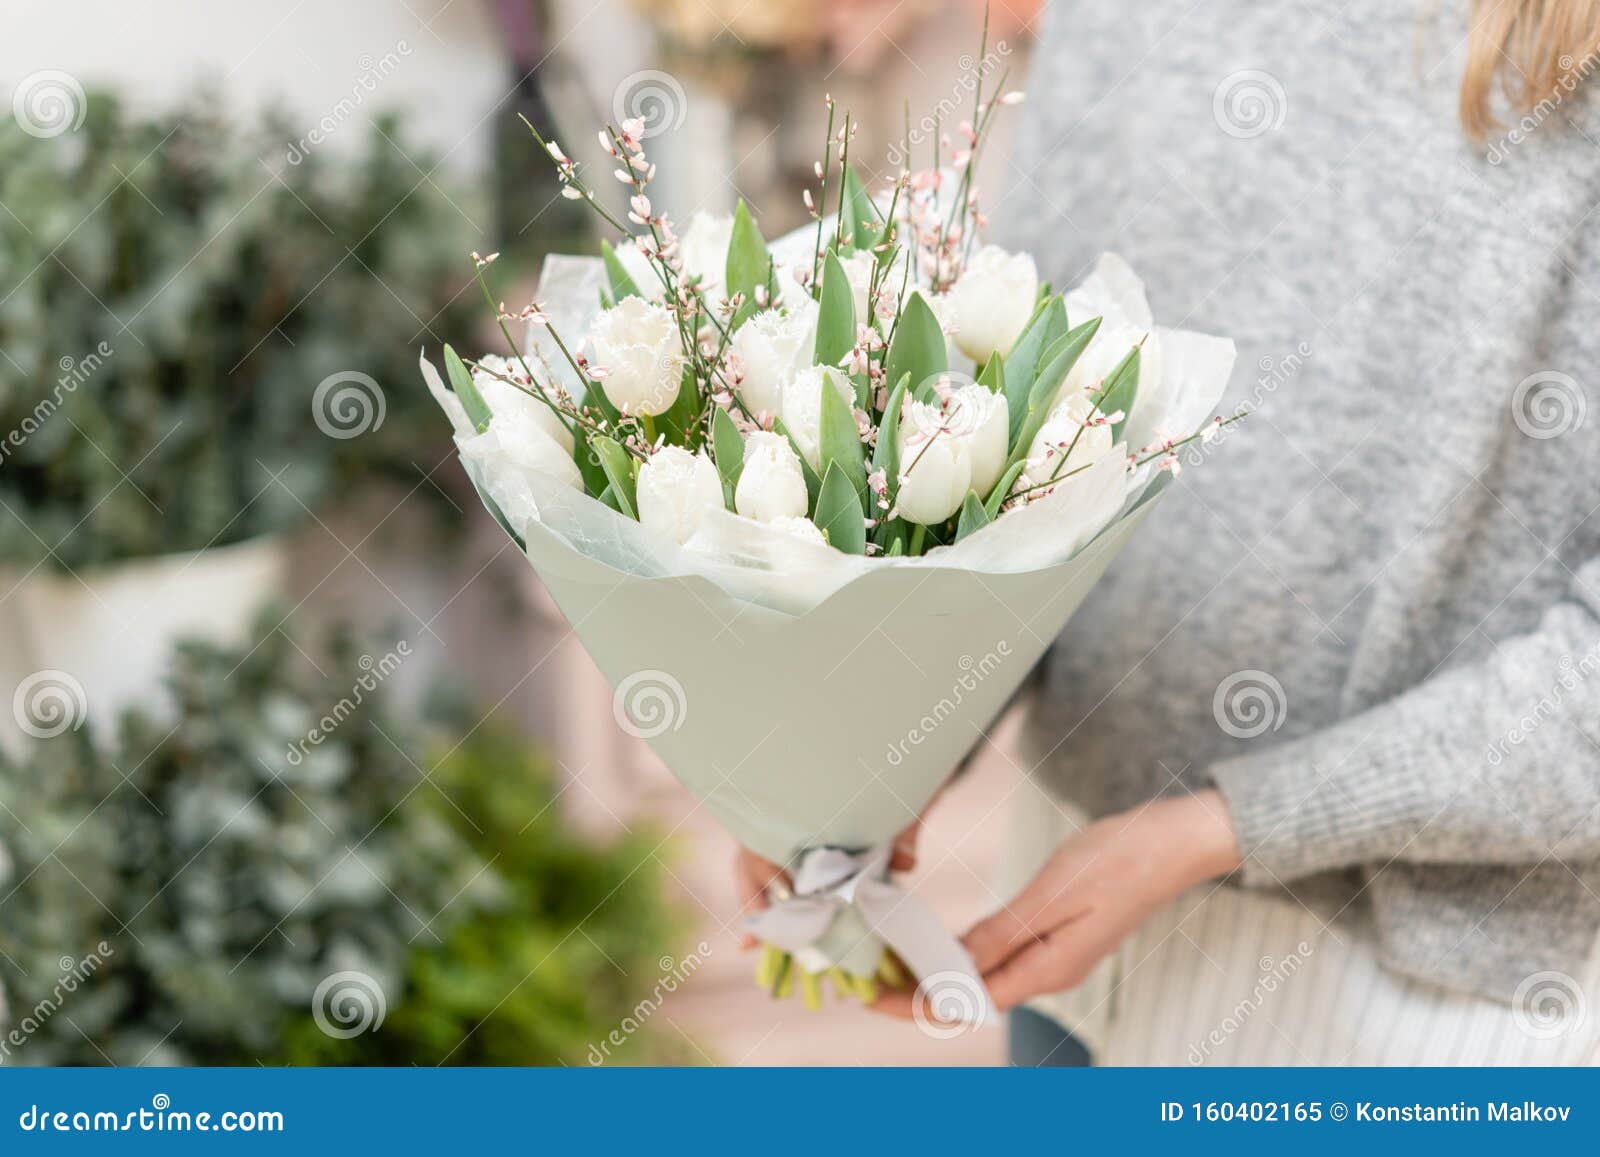 beautiful bouquet of white tulips flowers in woman hand. the work of the florist at a flower shop. cute lovely girl